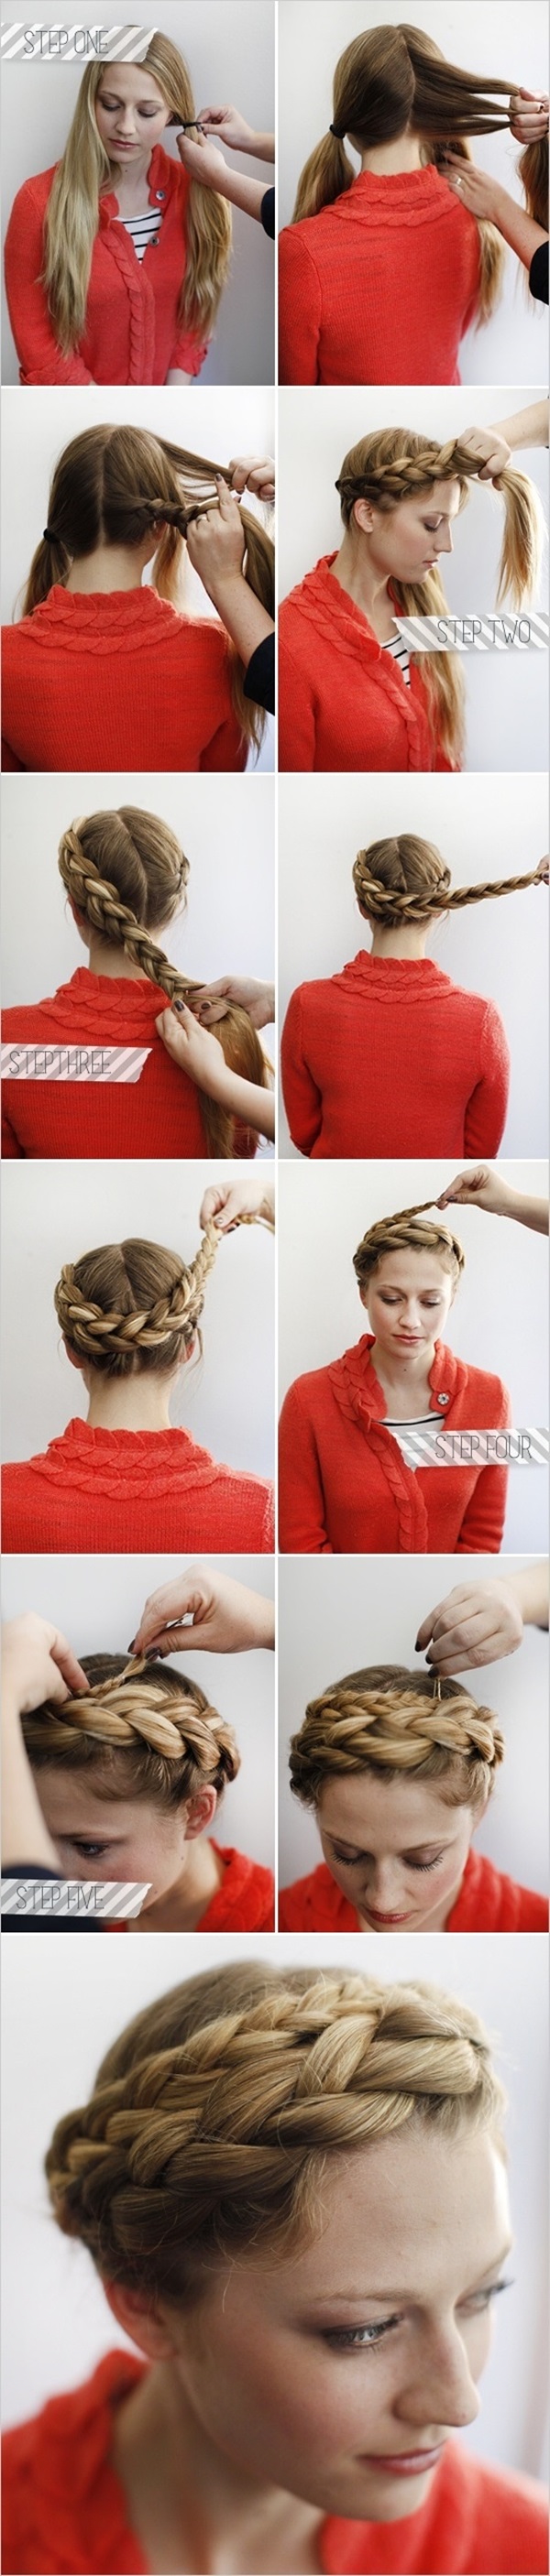 Simple Five Minute Hairstyles (57)